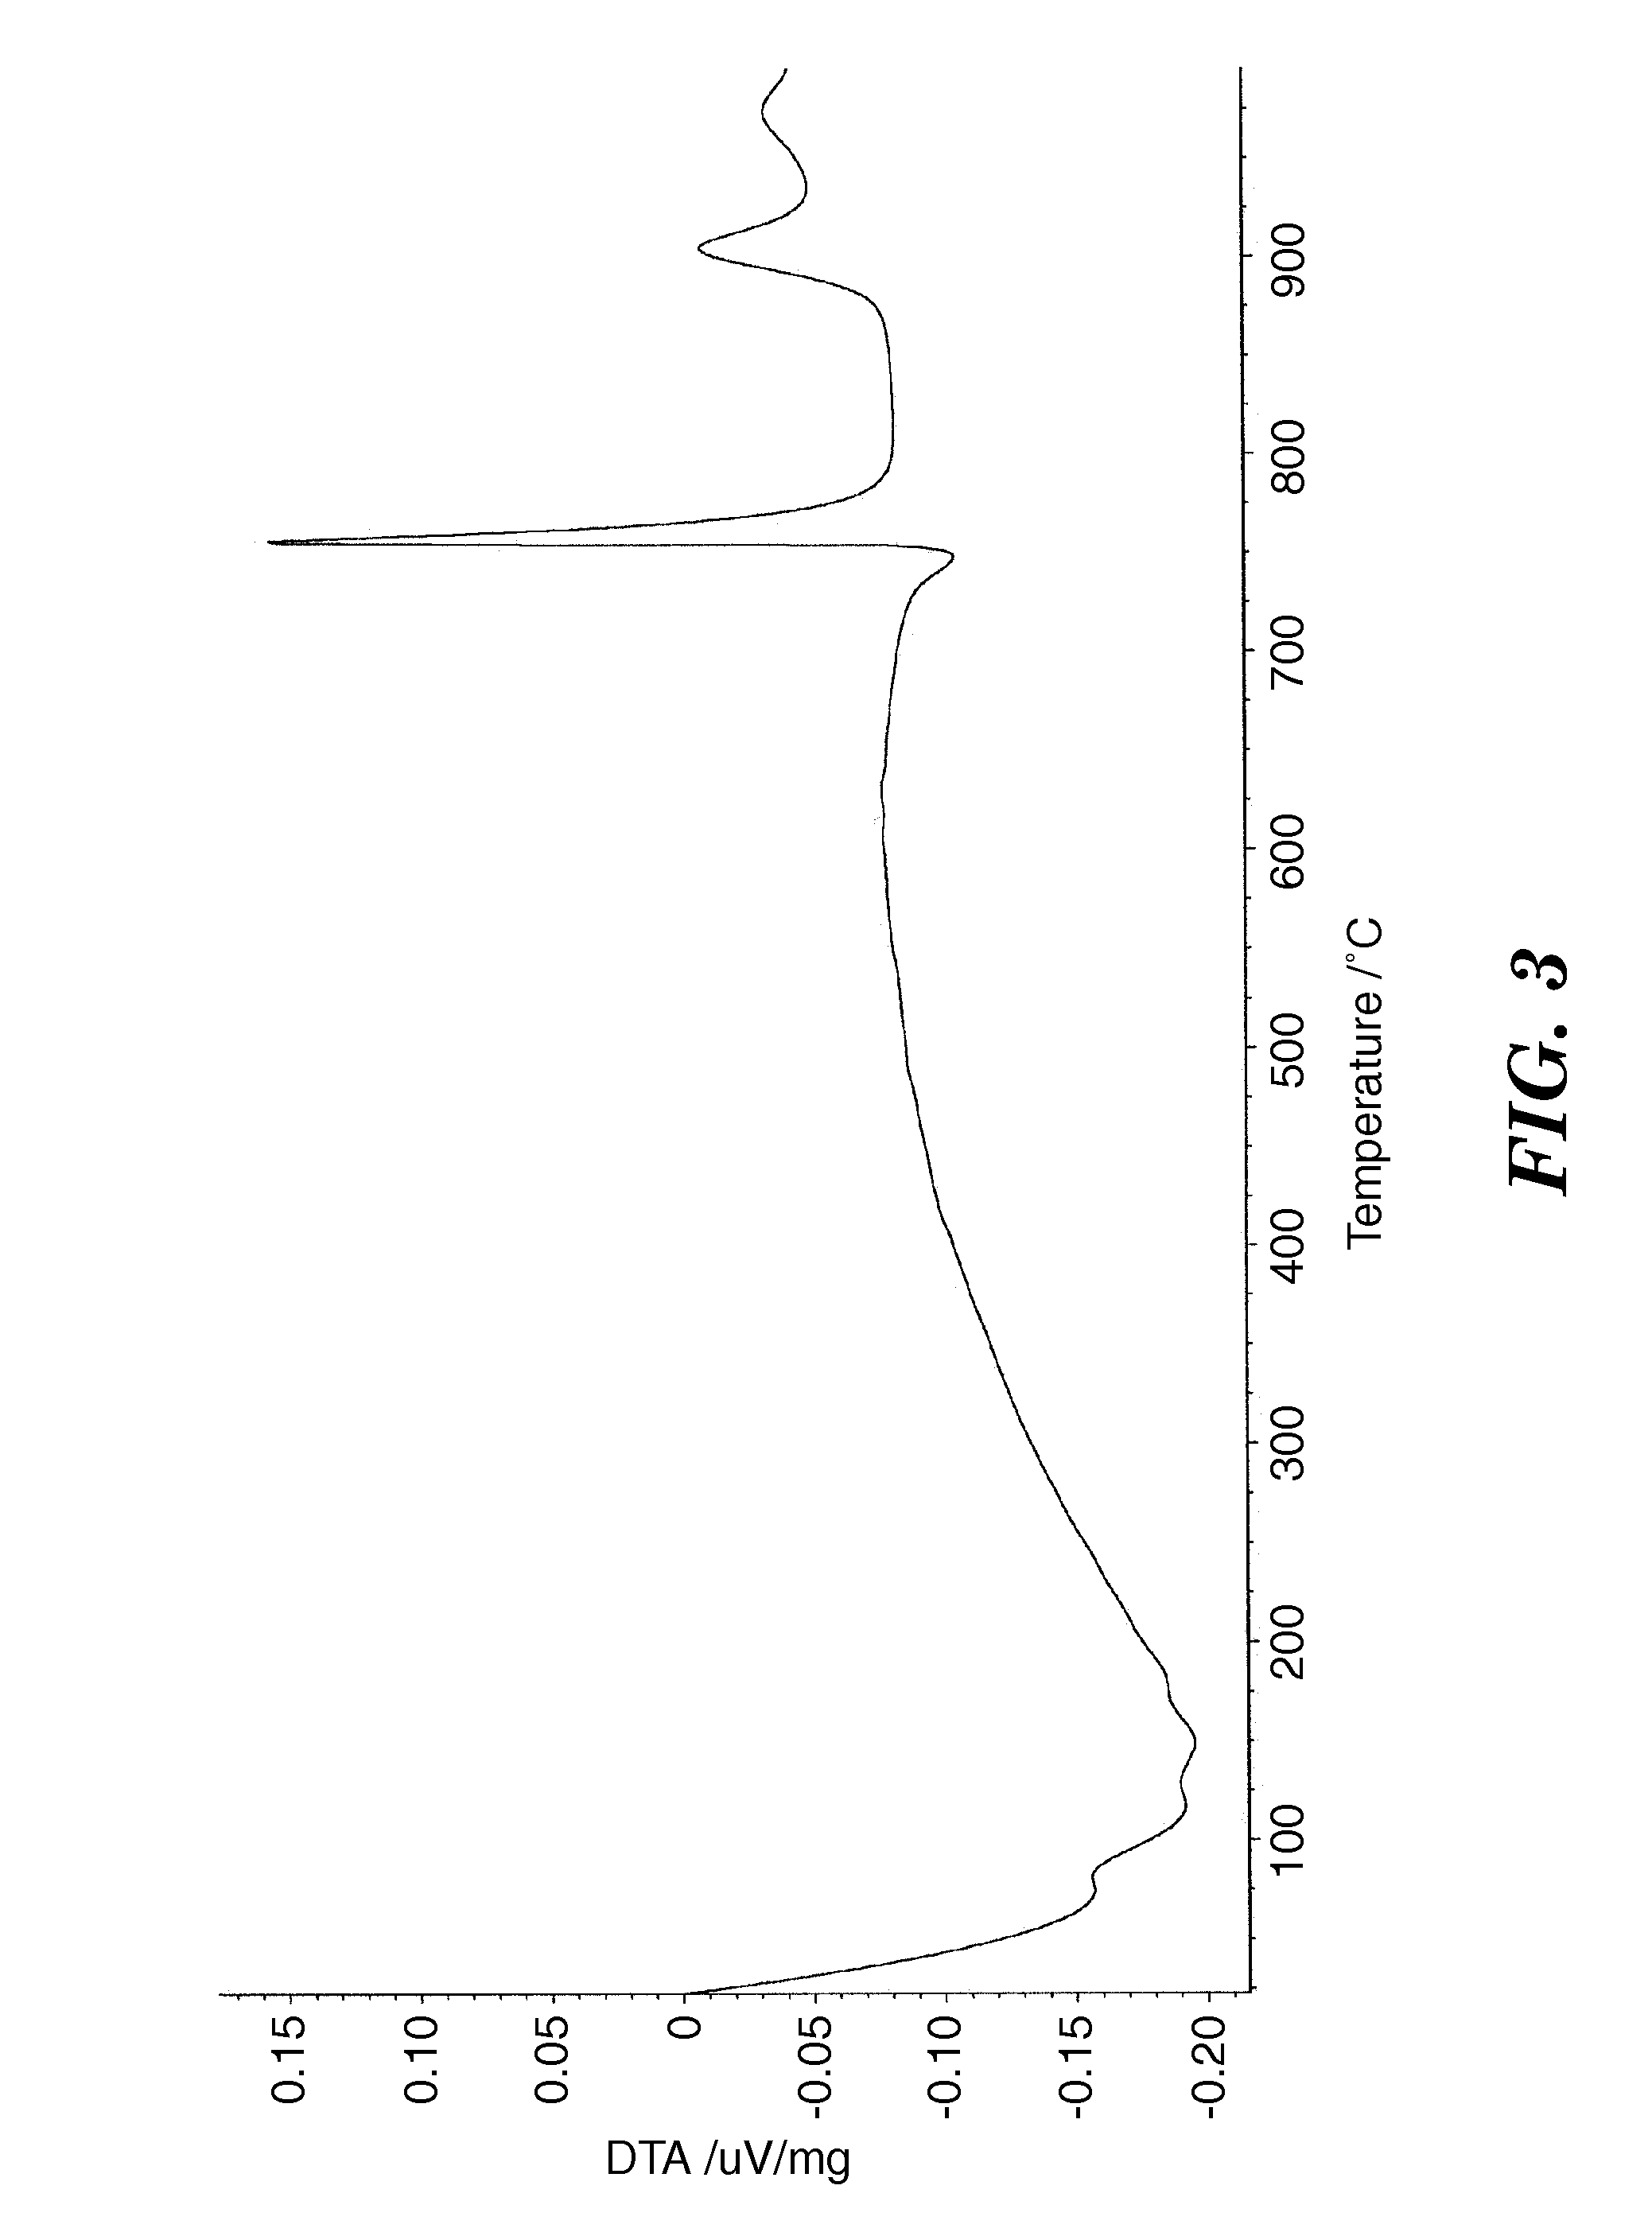 Metal Oxide Ceramic and Method of Making Articles Therewith